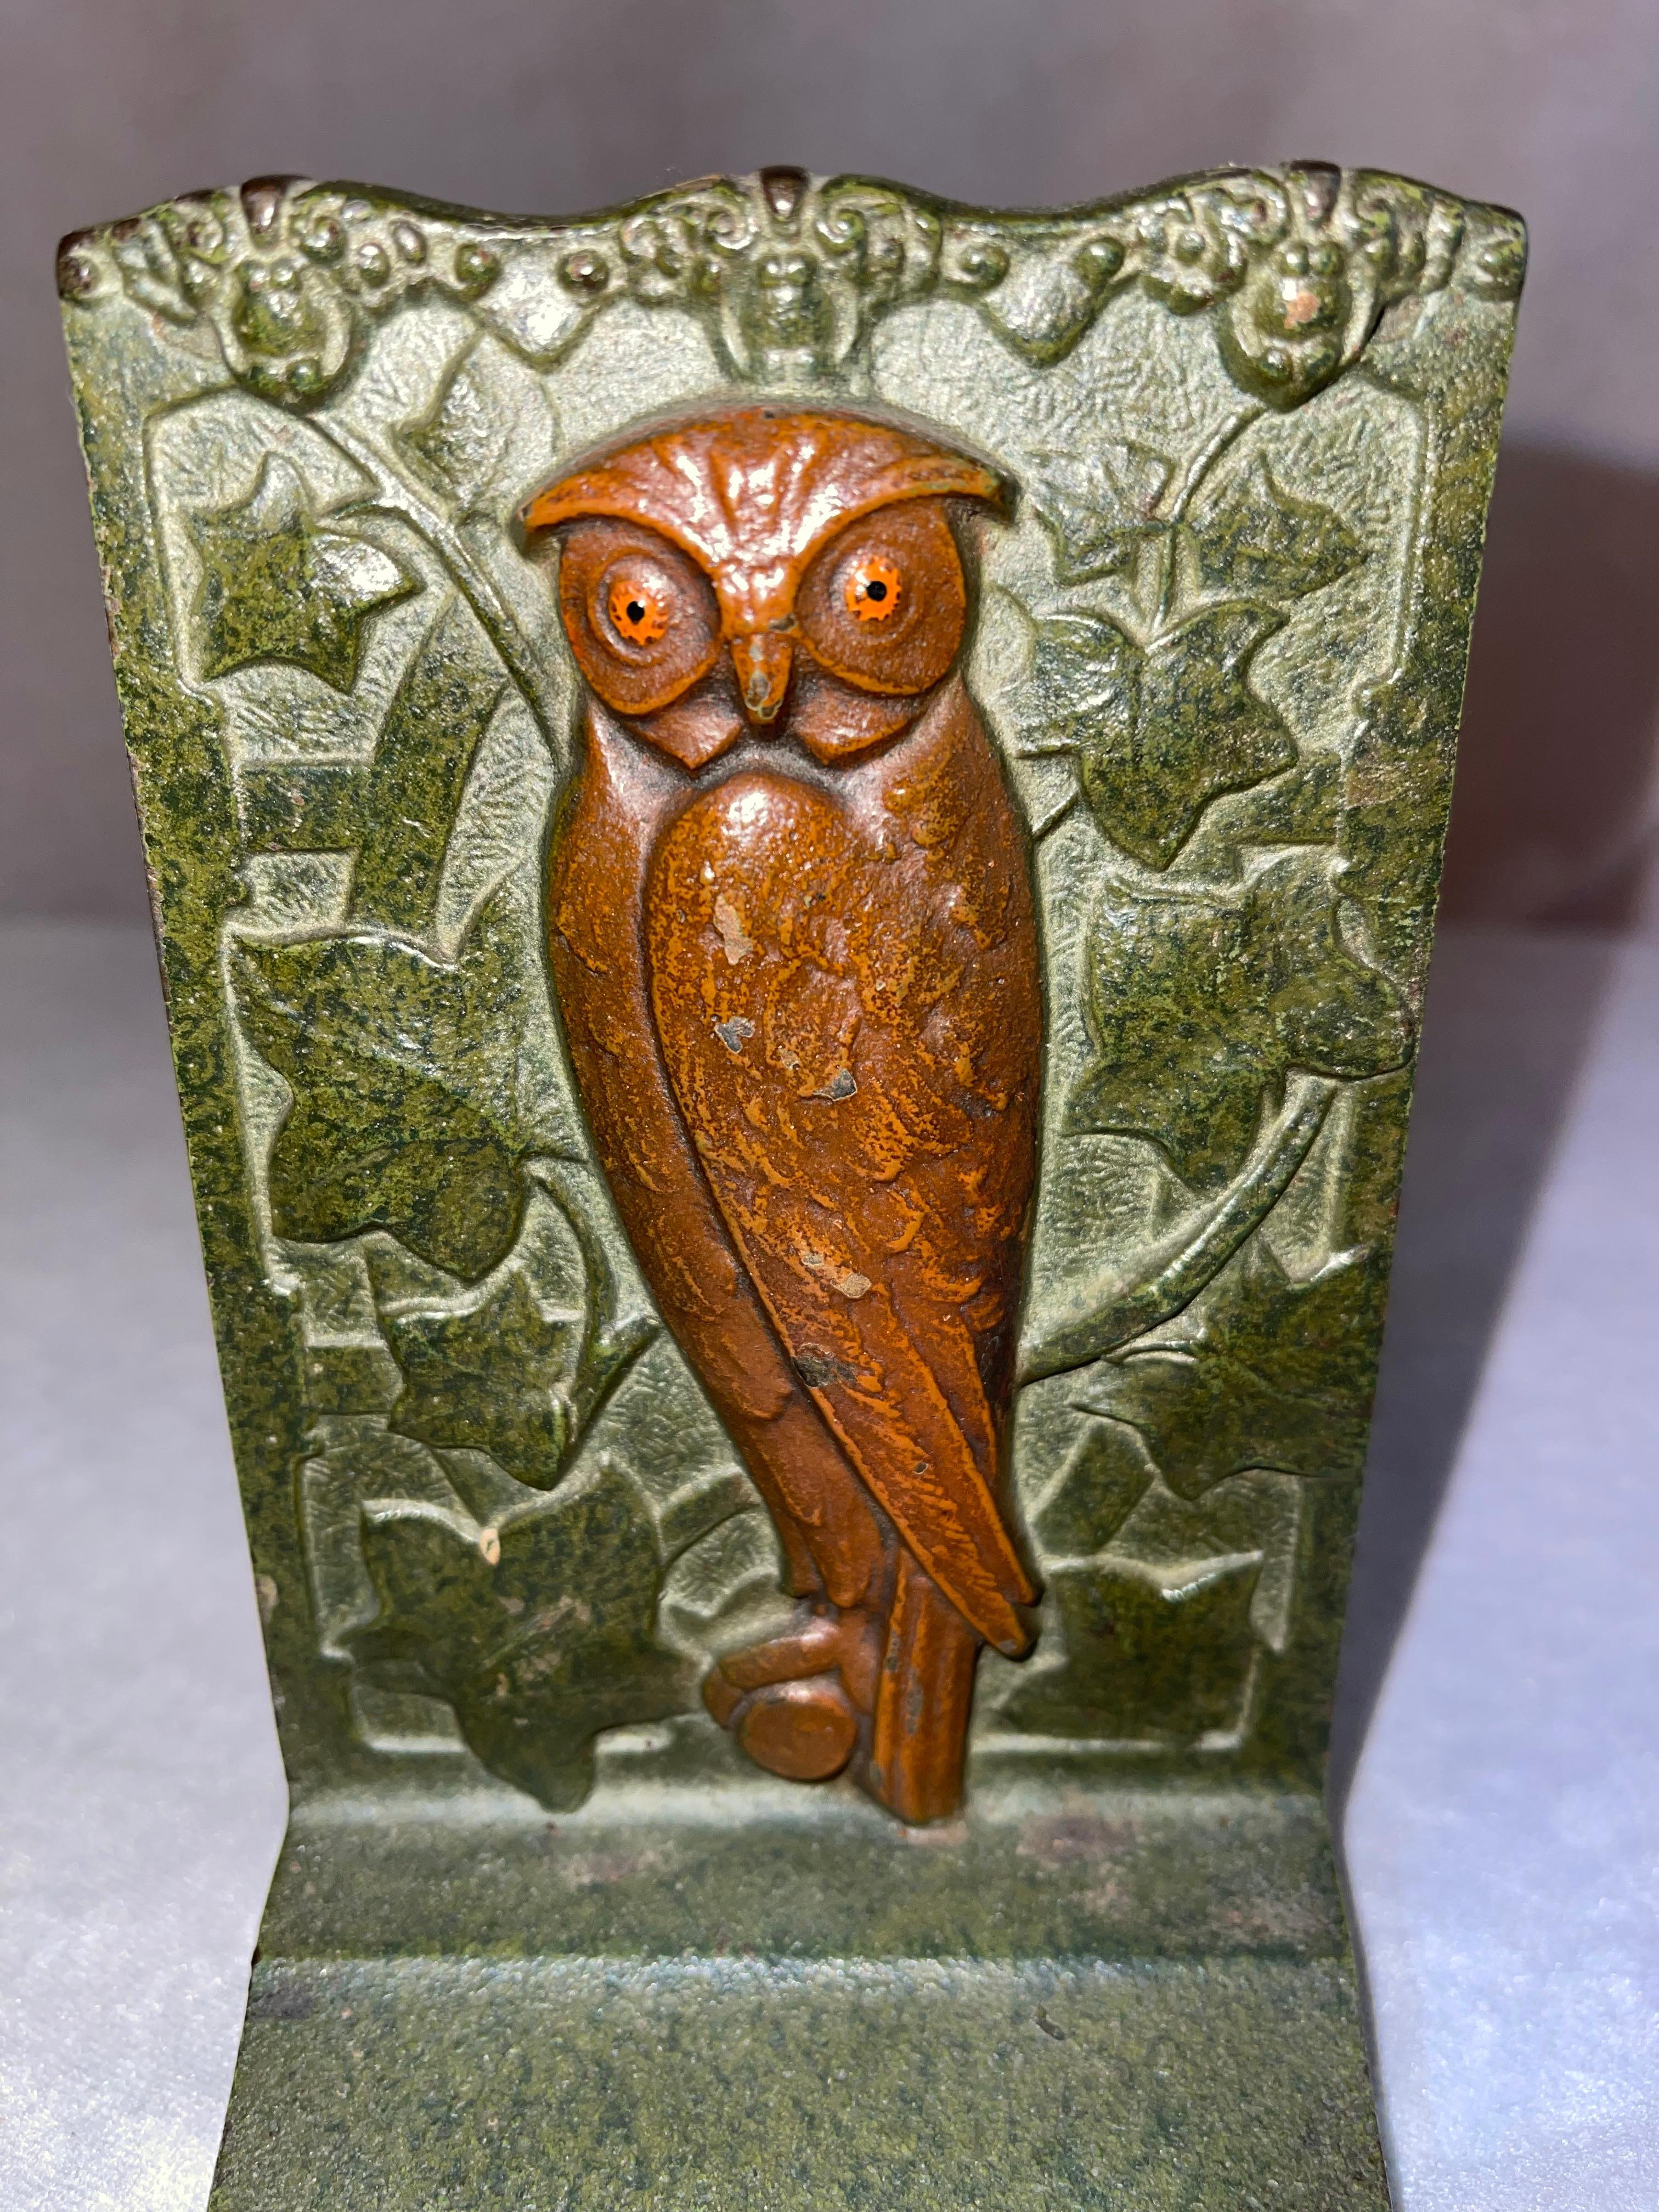 20th Century Pair of Art Nouveau Cast Iron Bookends w/Owls, by the Judd Co. ca 1900